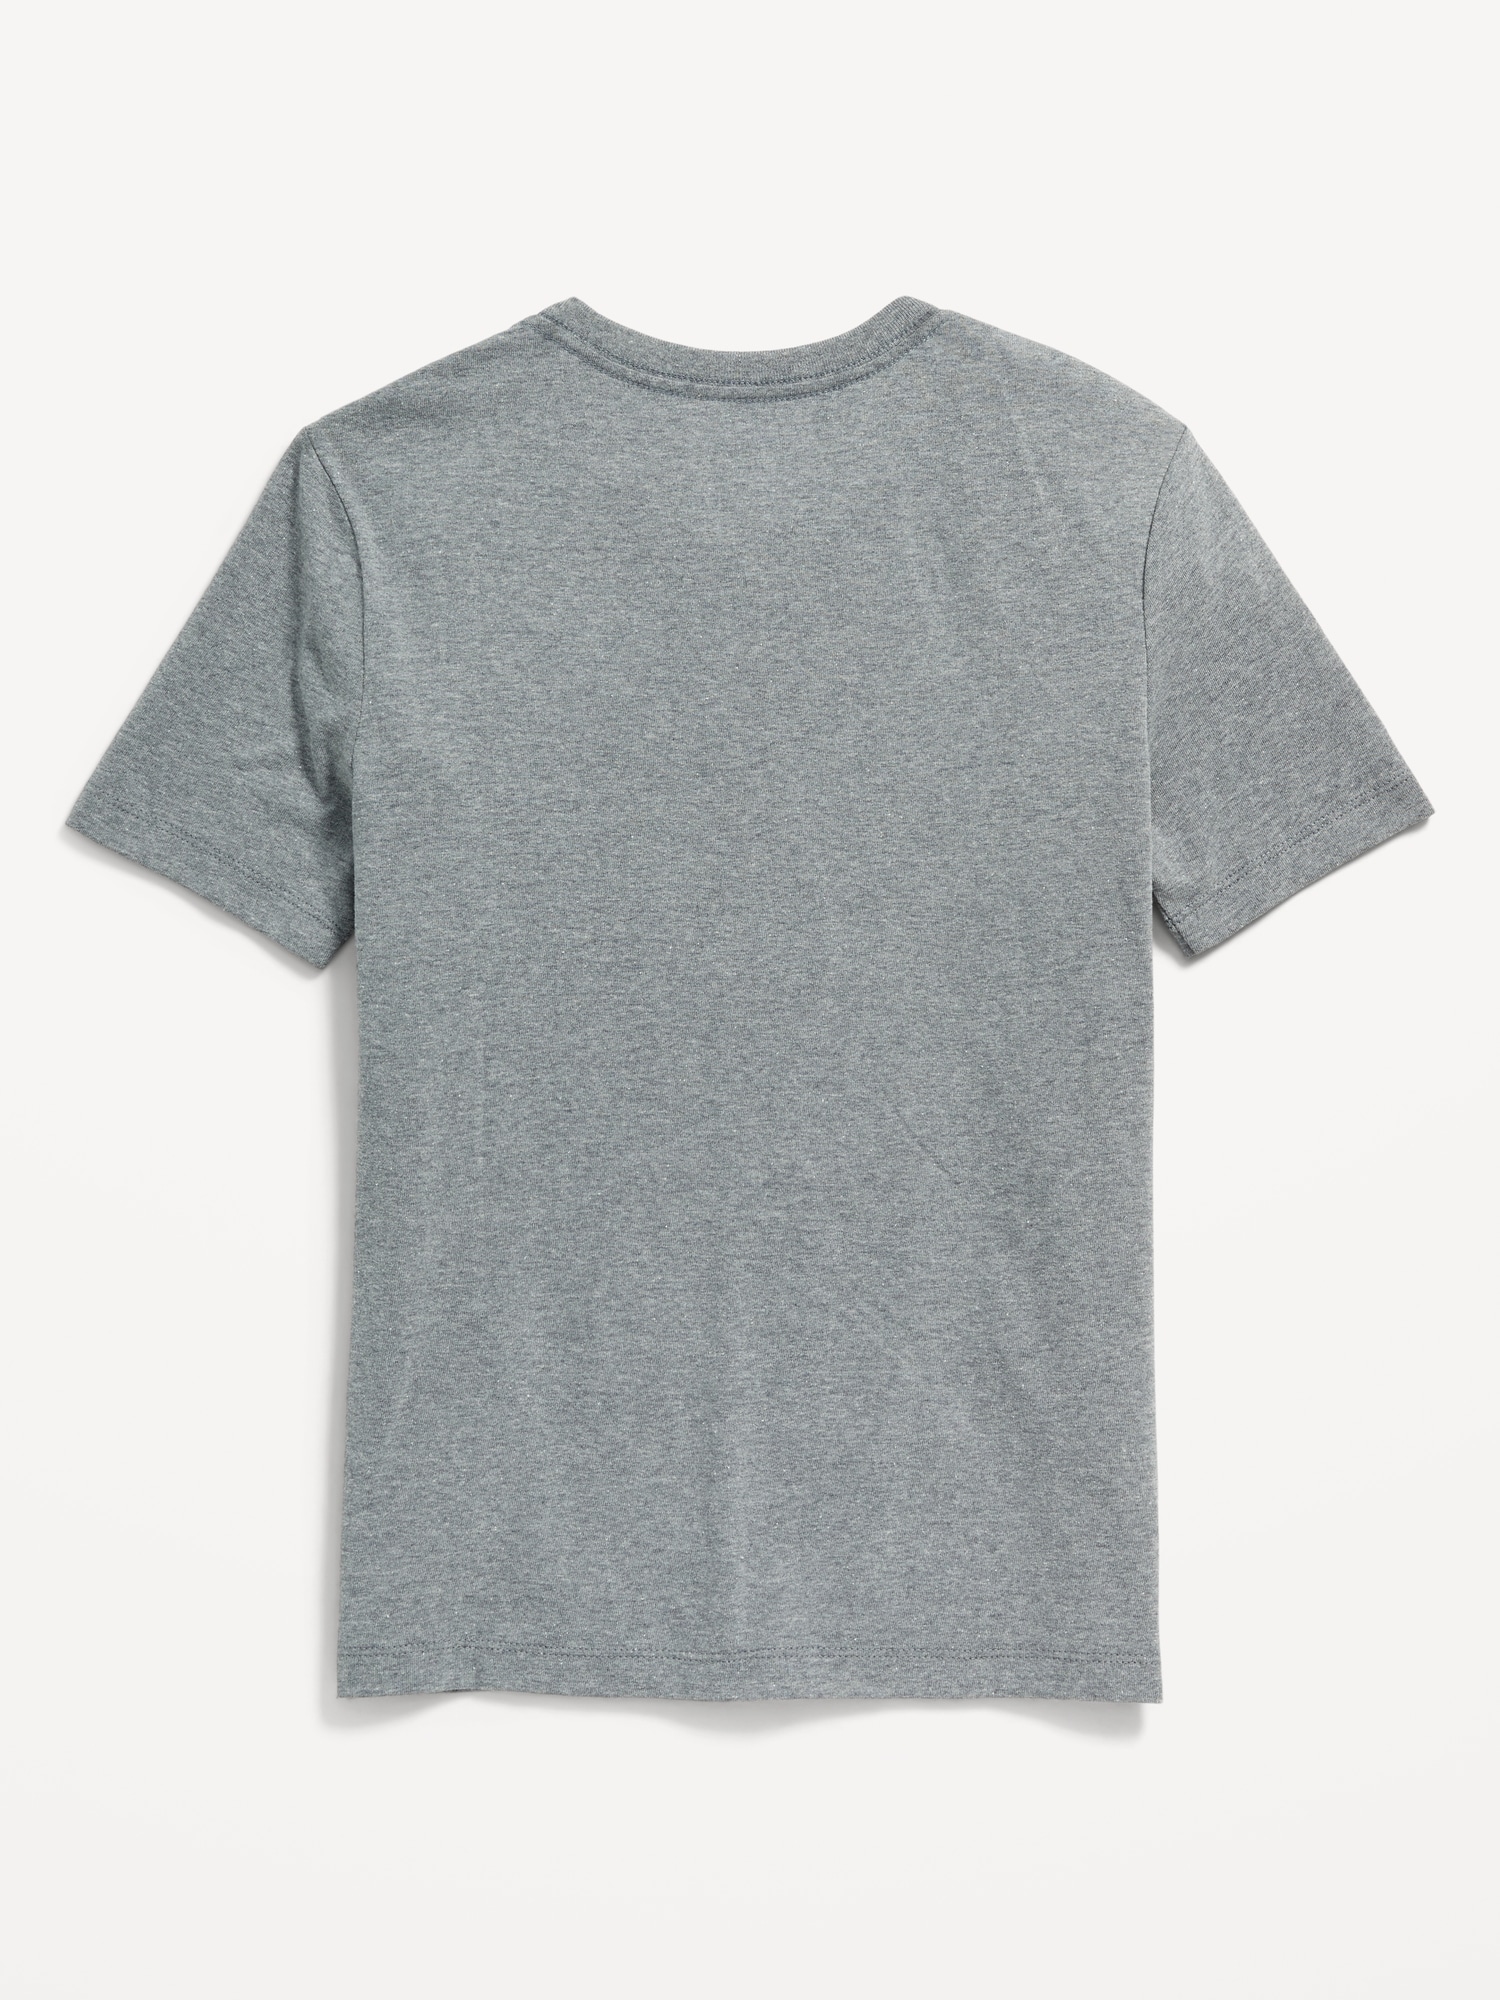 Fall Guys™ Gender-Neutral Graphic T-Shirt for Kids | Old Navy